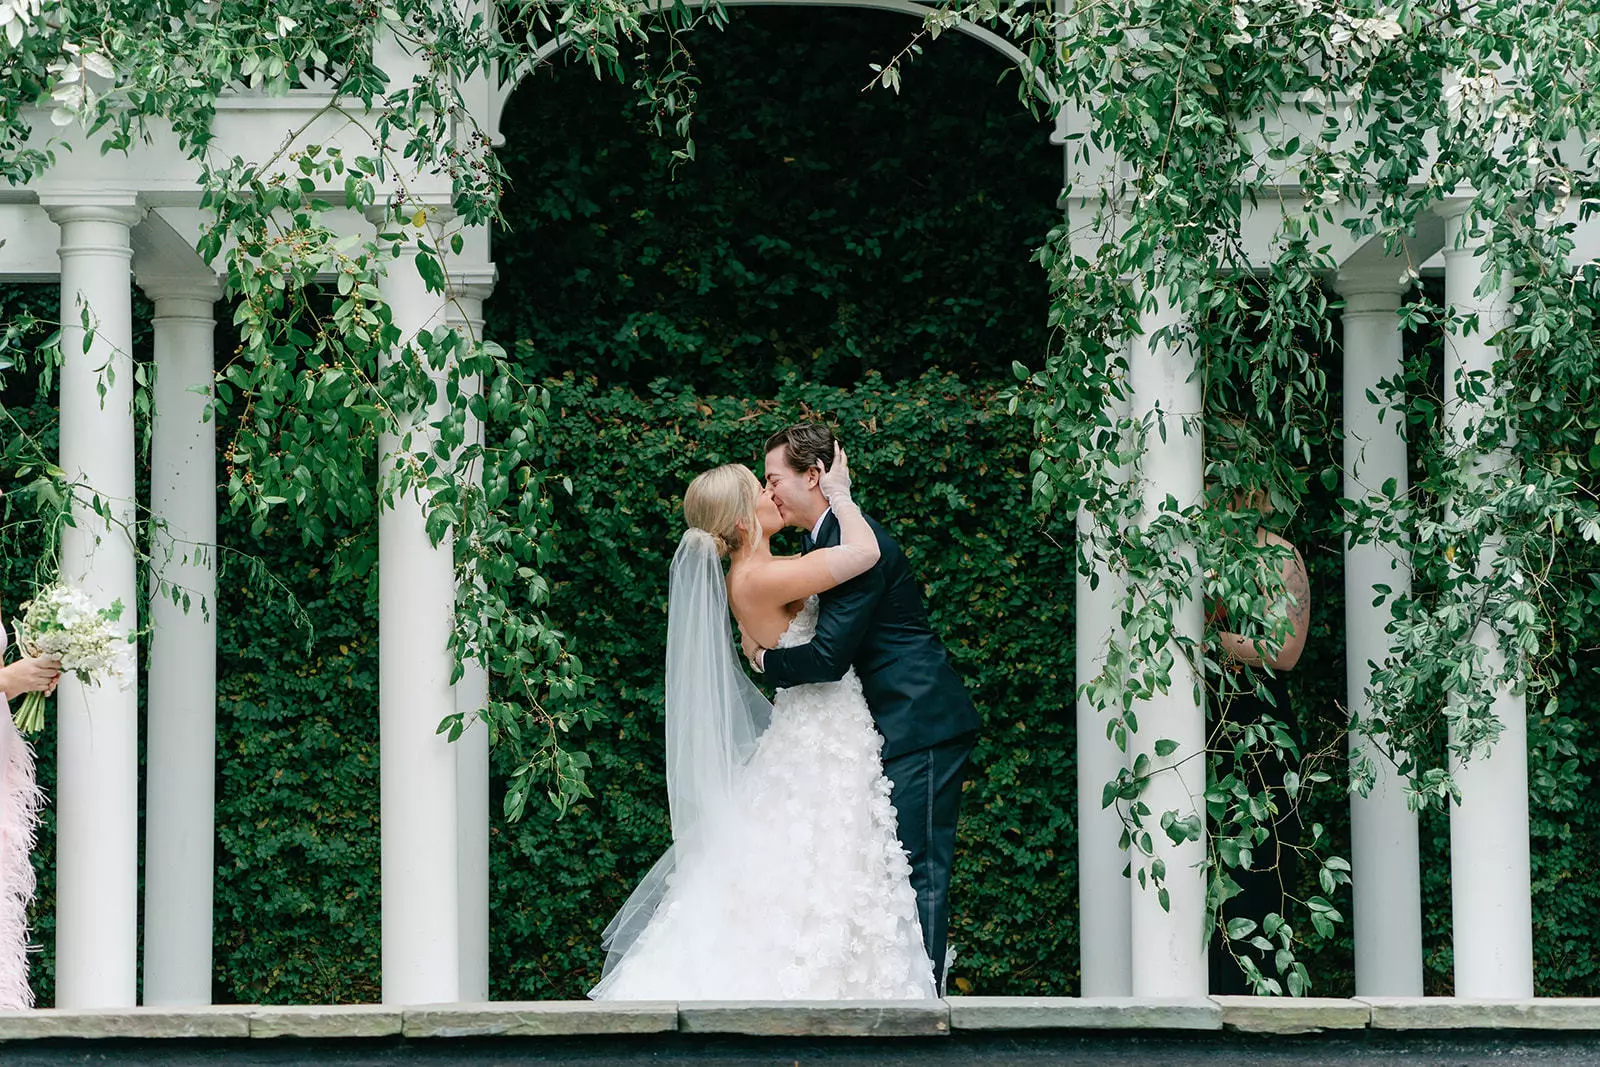 How Much Does a Charleston Destination Wedding Cost?